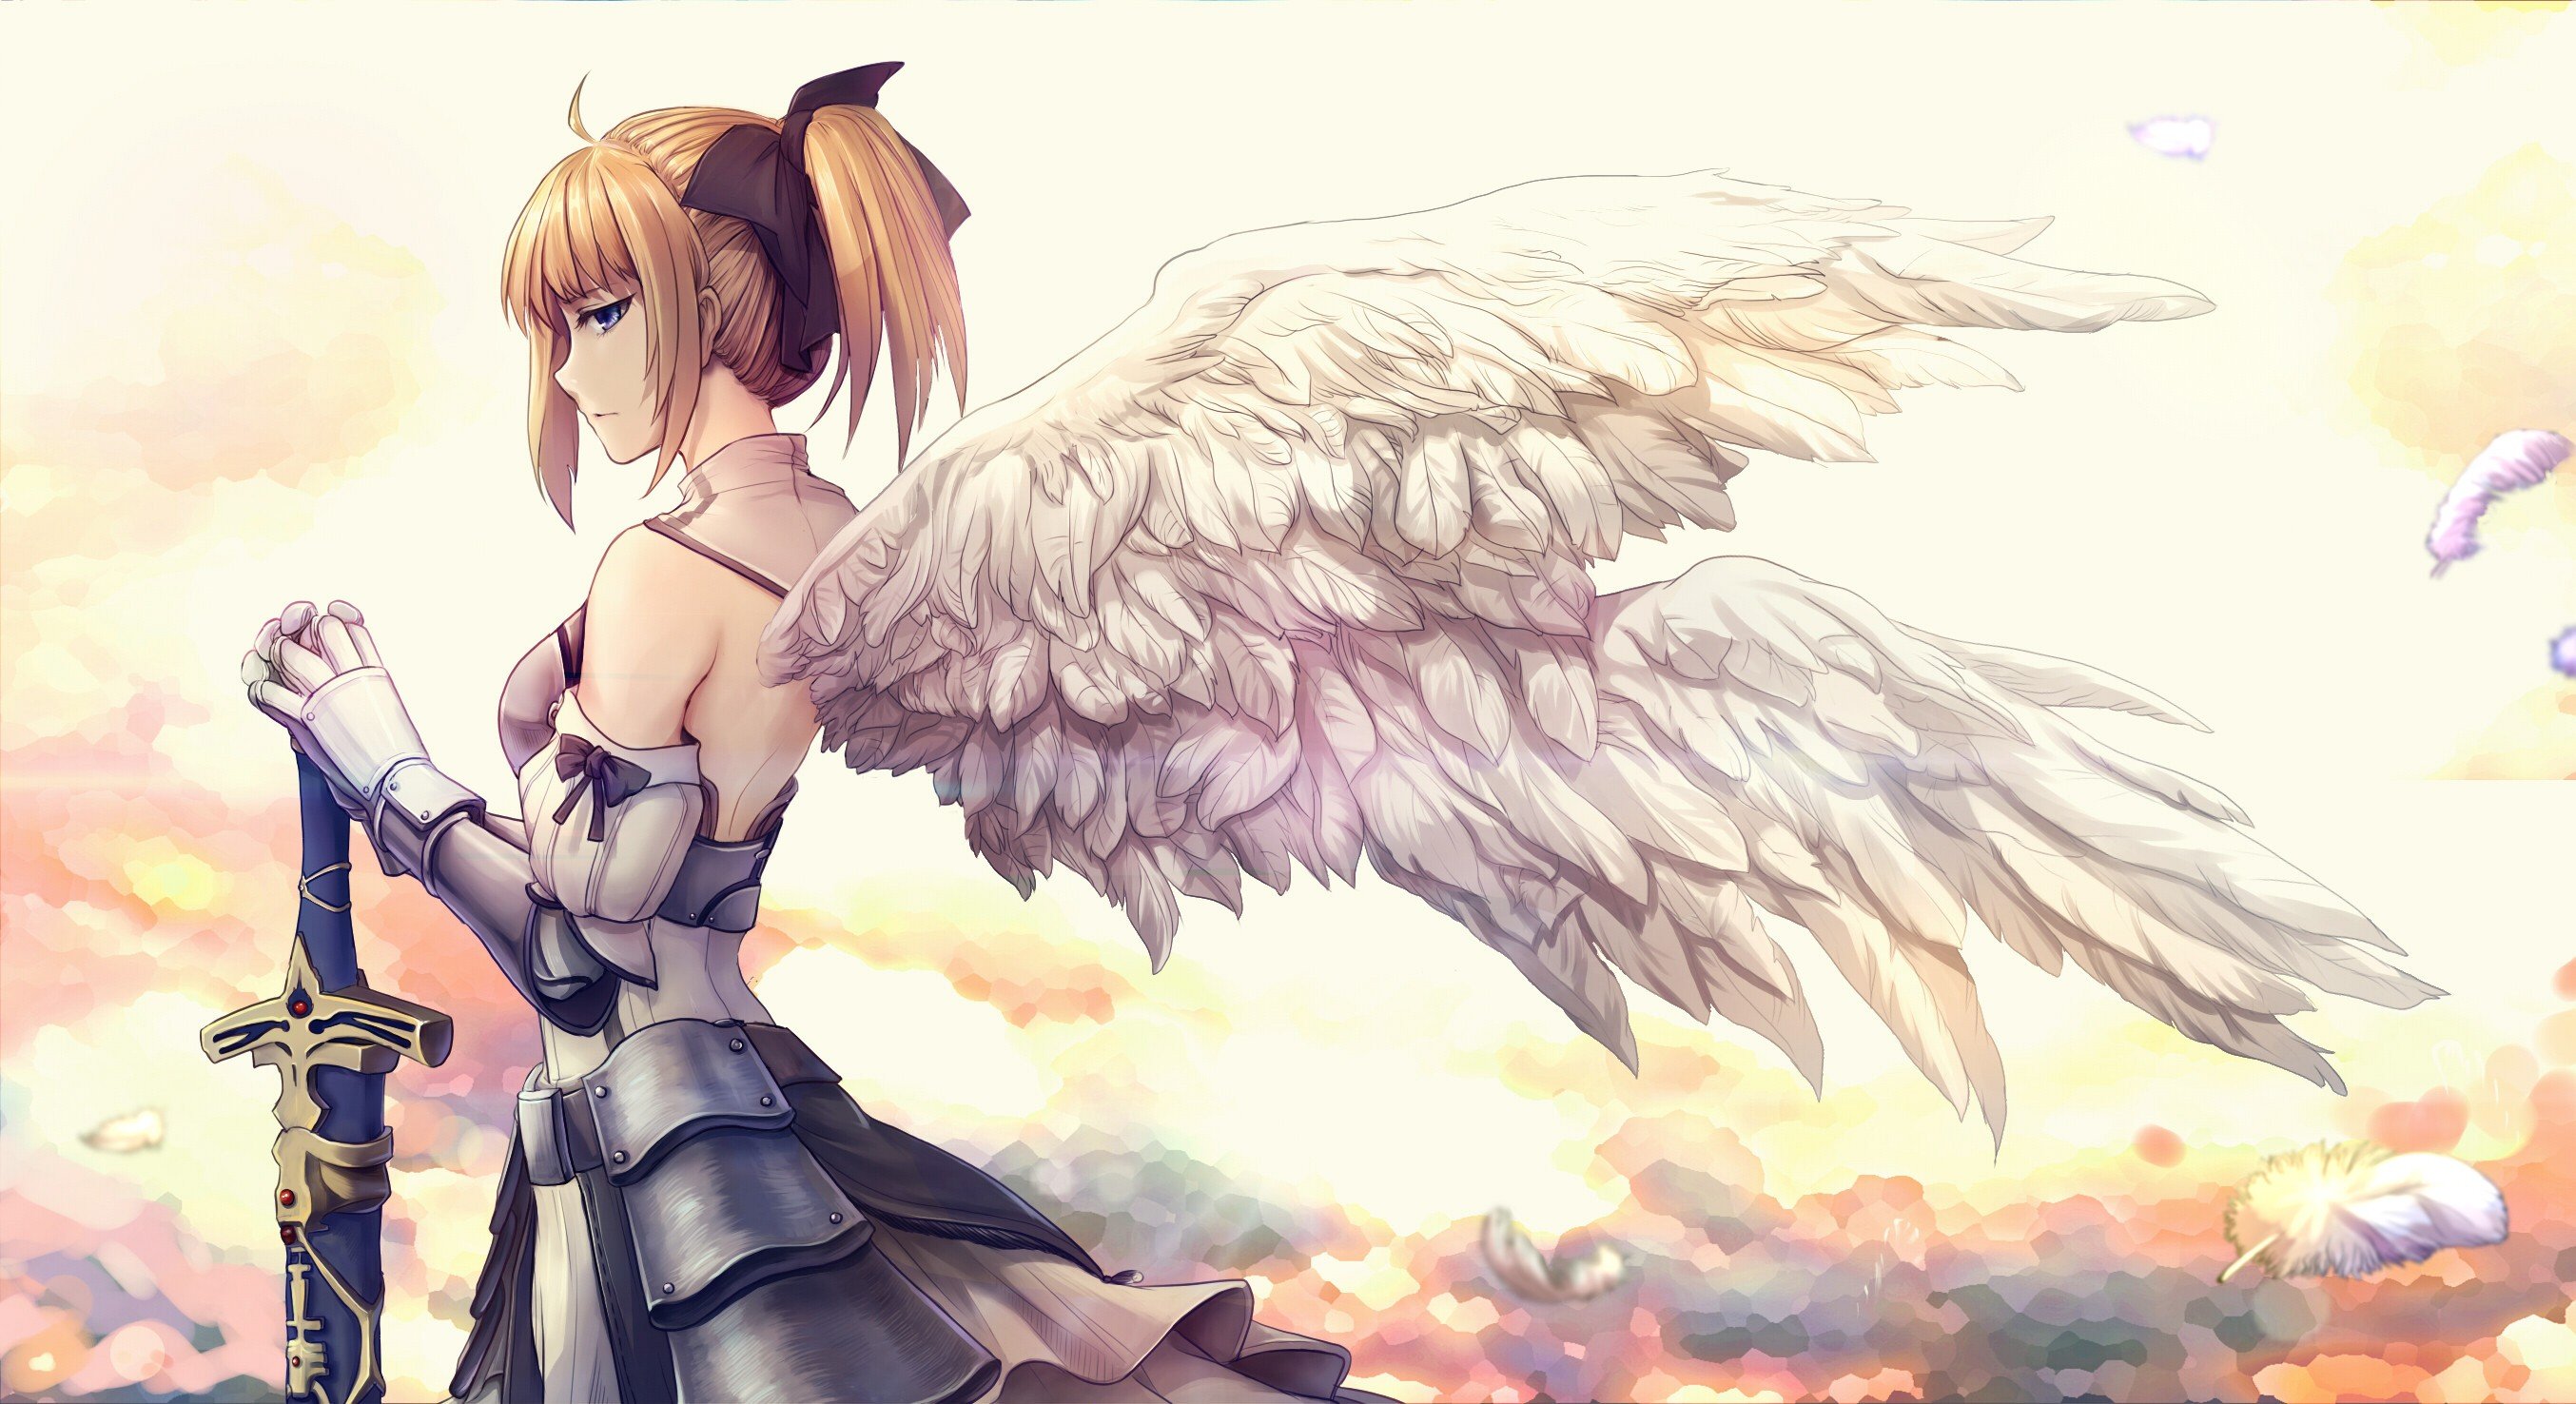 Fate Unlimited Codes, Fate Series, Saber Lily, Anime, Anime girls, Wings, Sword, Feathers Wallpaper